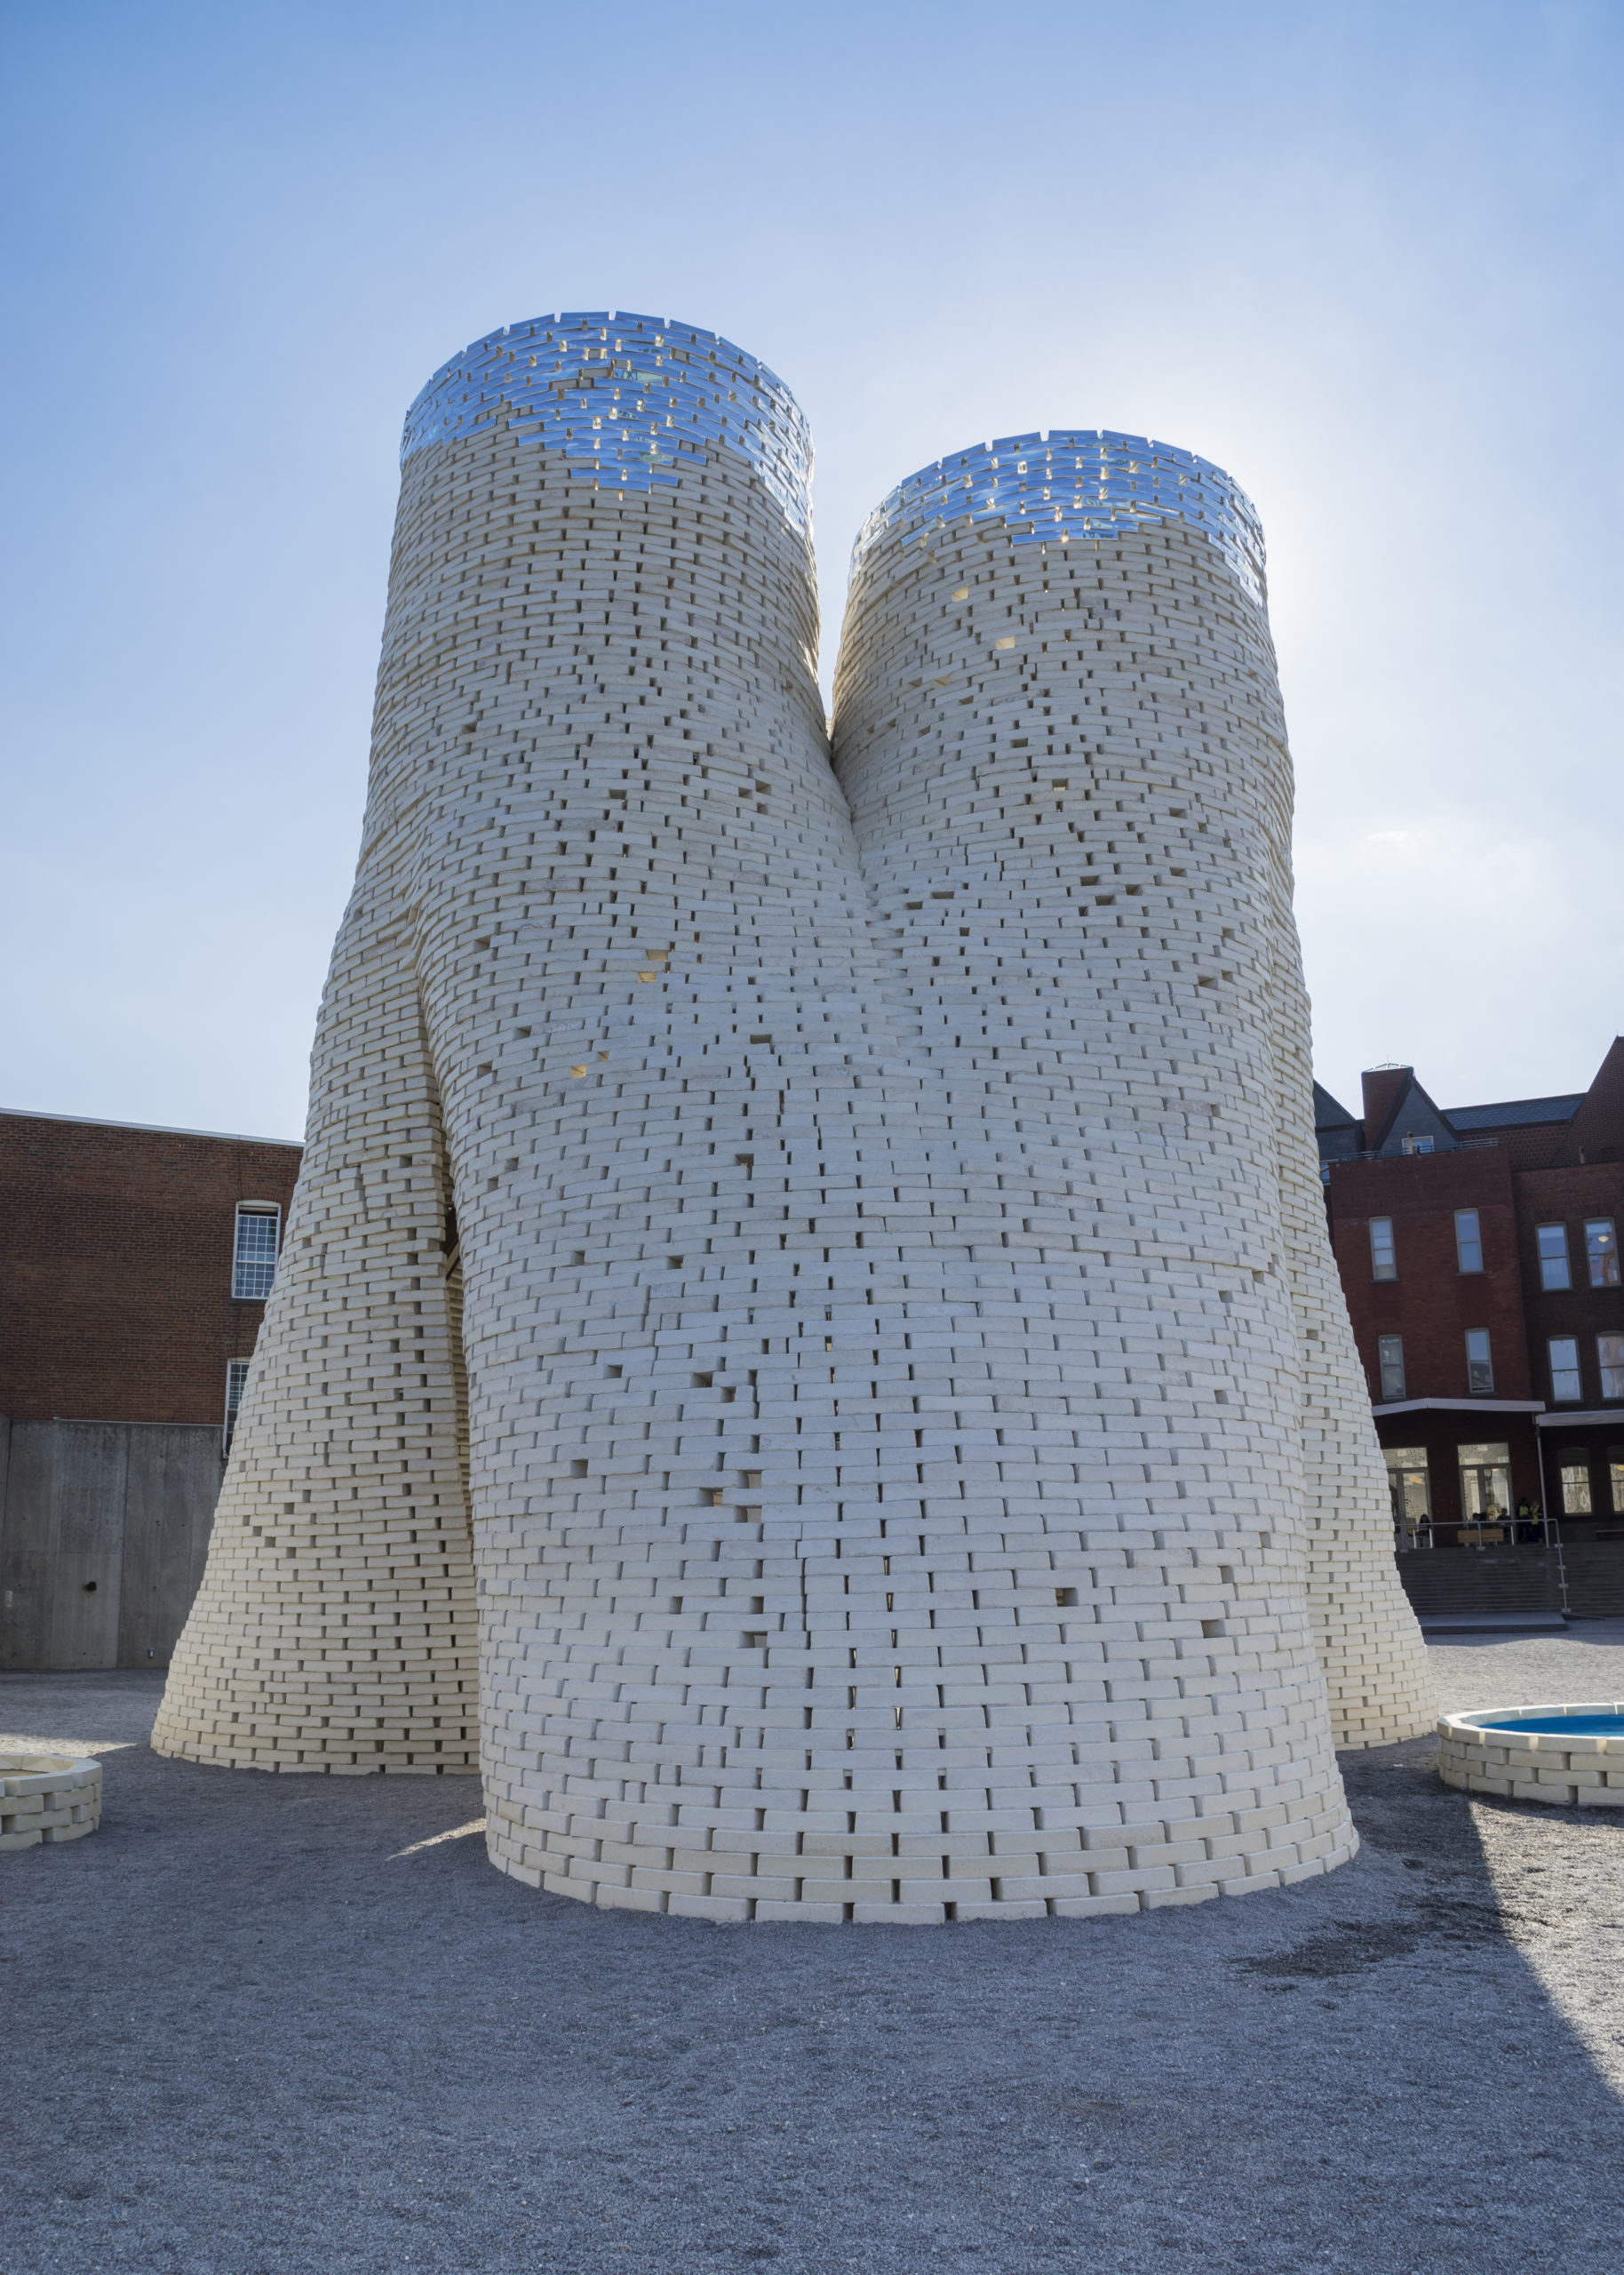 The Bricks That Built This Tower Were Grown From Fungus